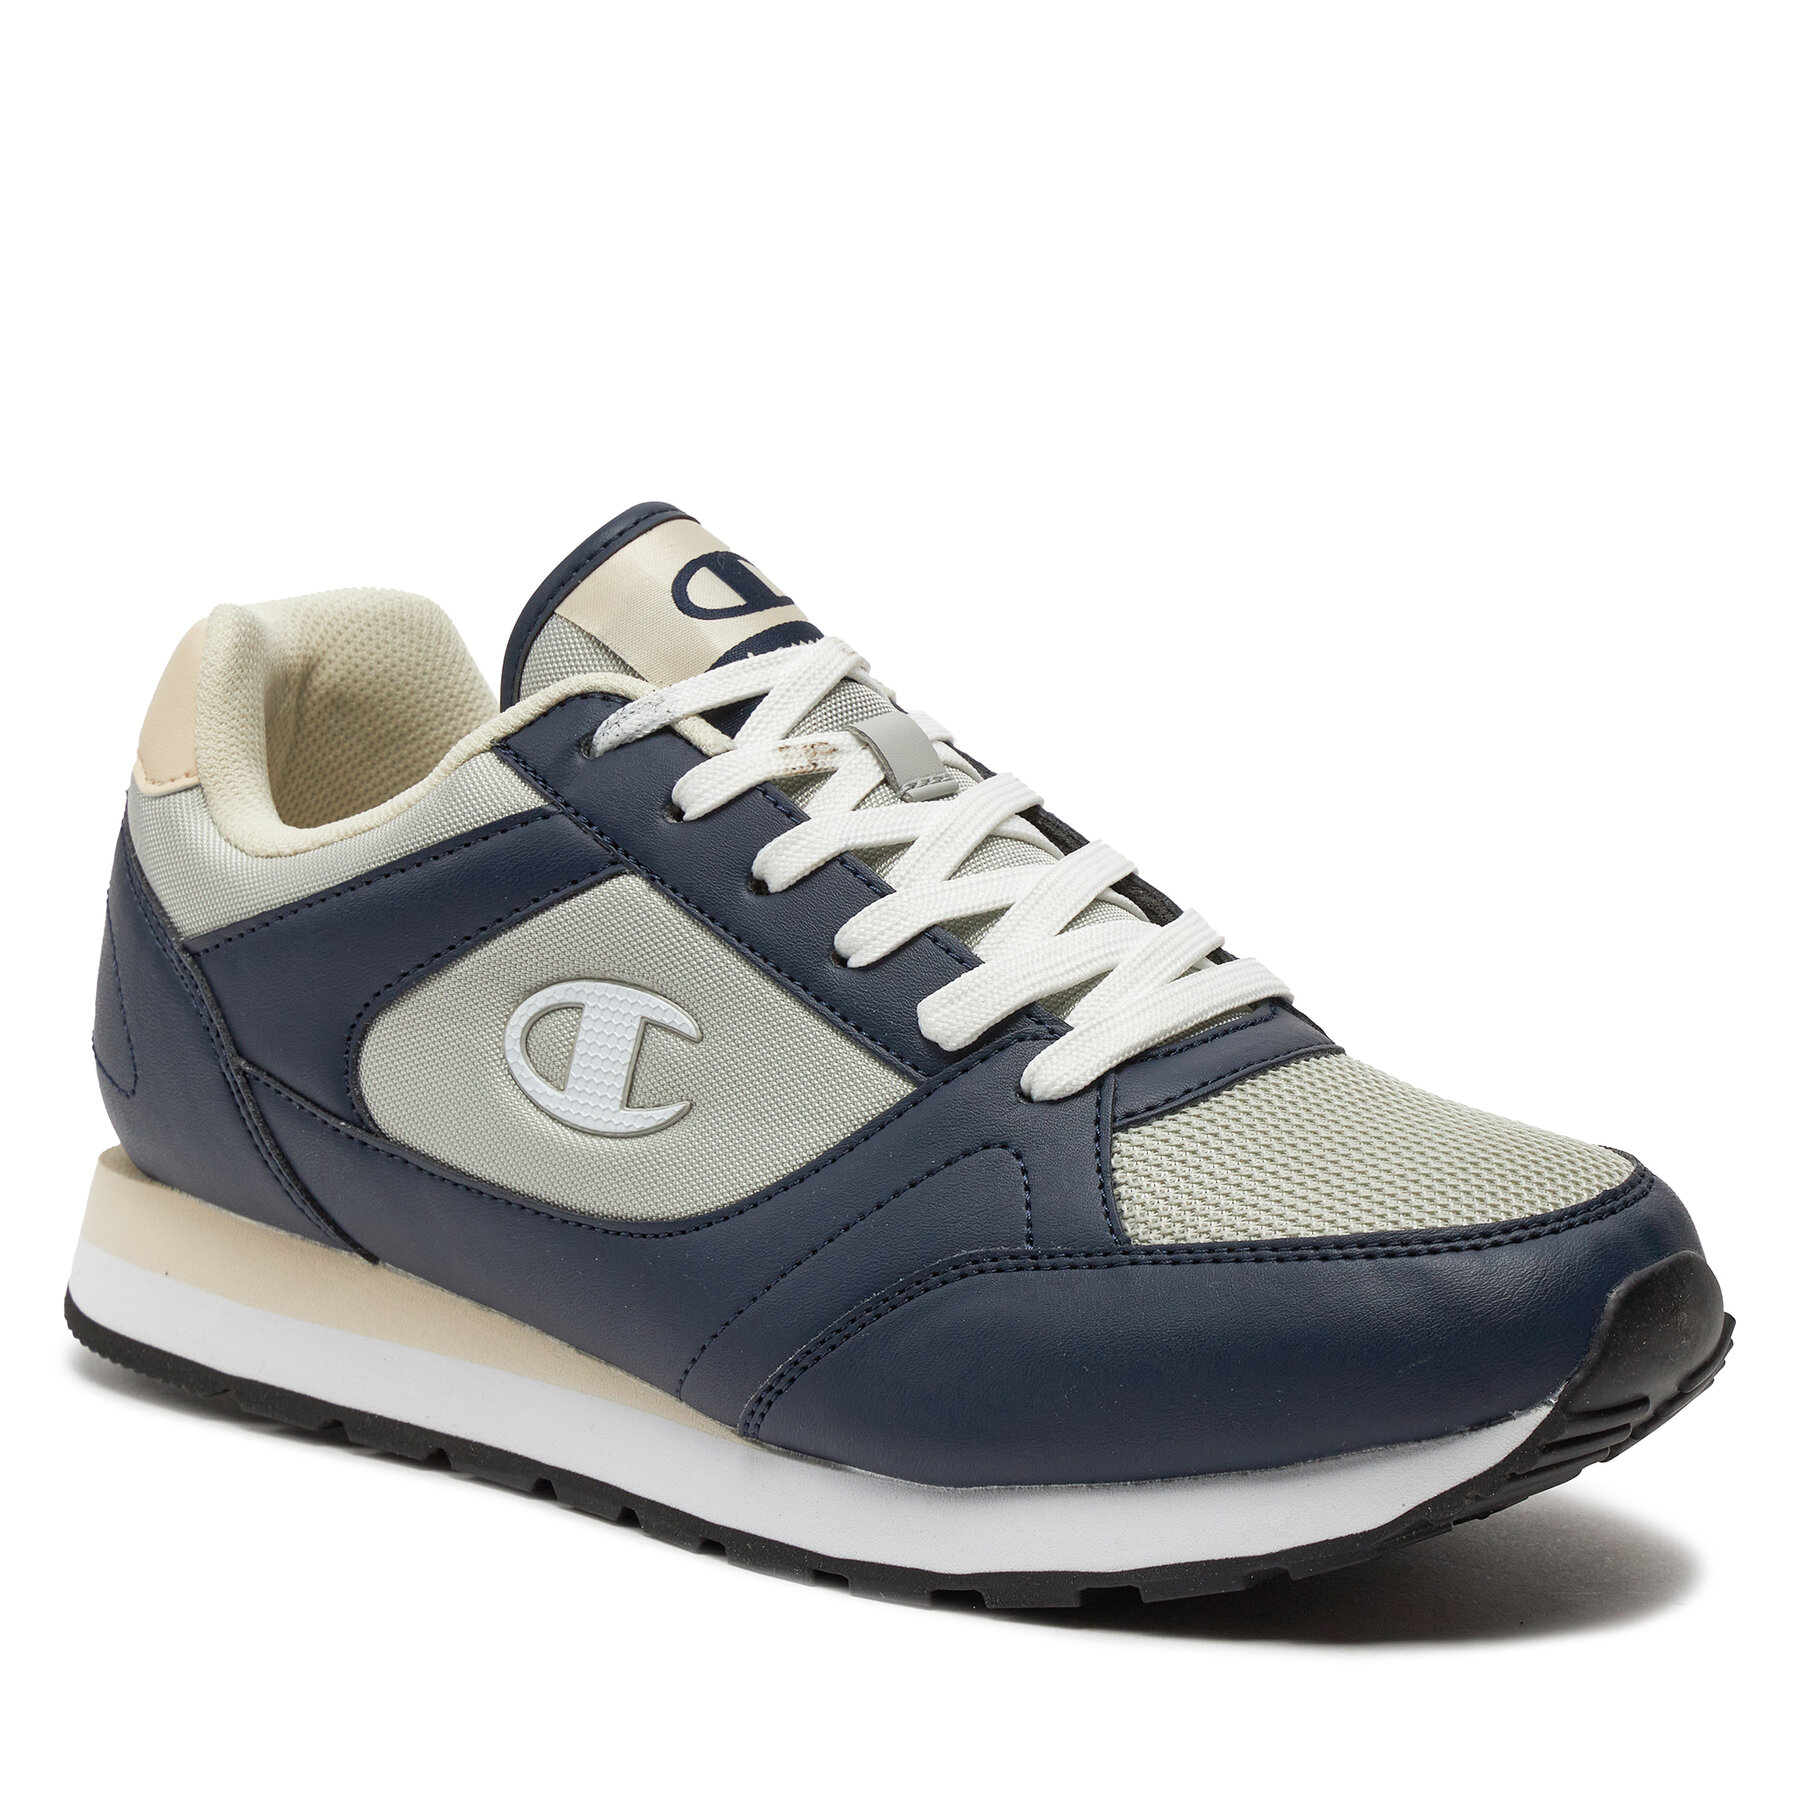 Sneakers Champion Rr Champ Ii Mix Material Low Cut Shoe S22168-CHA-BS509 Nny/Grey/Ofw